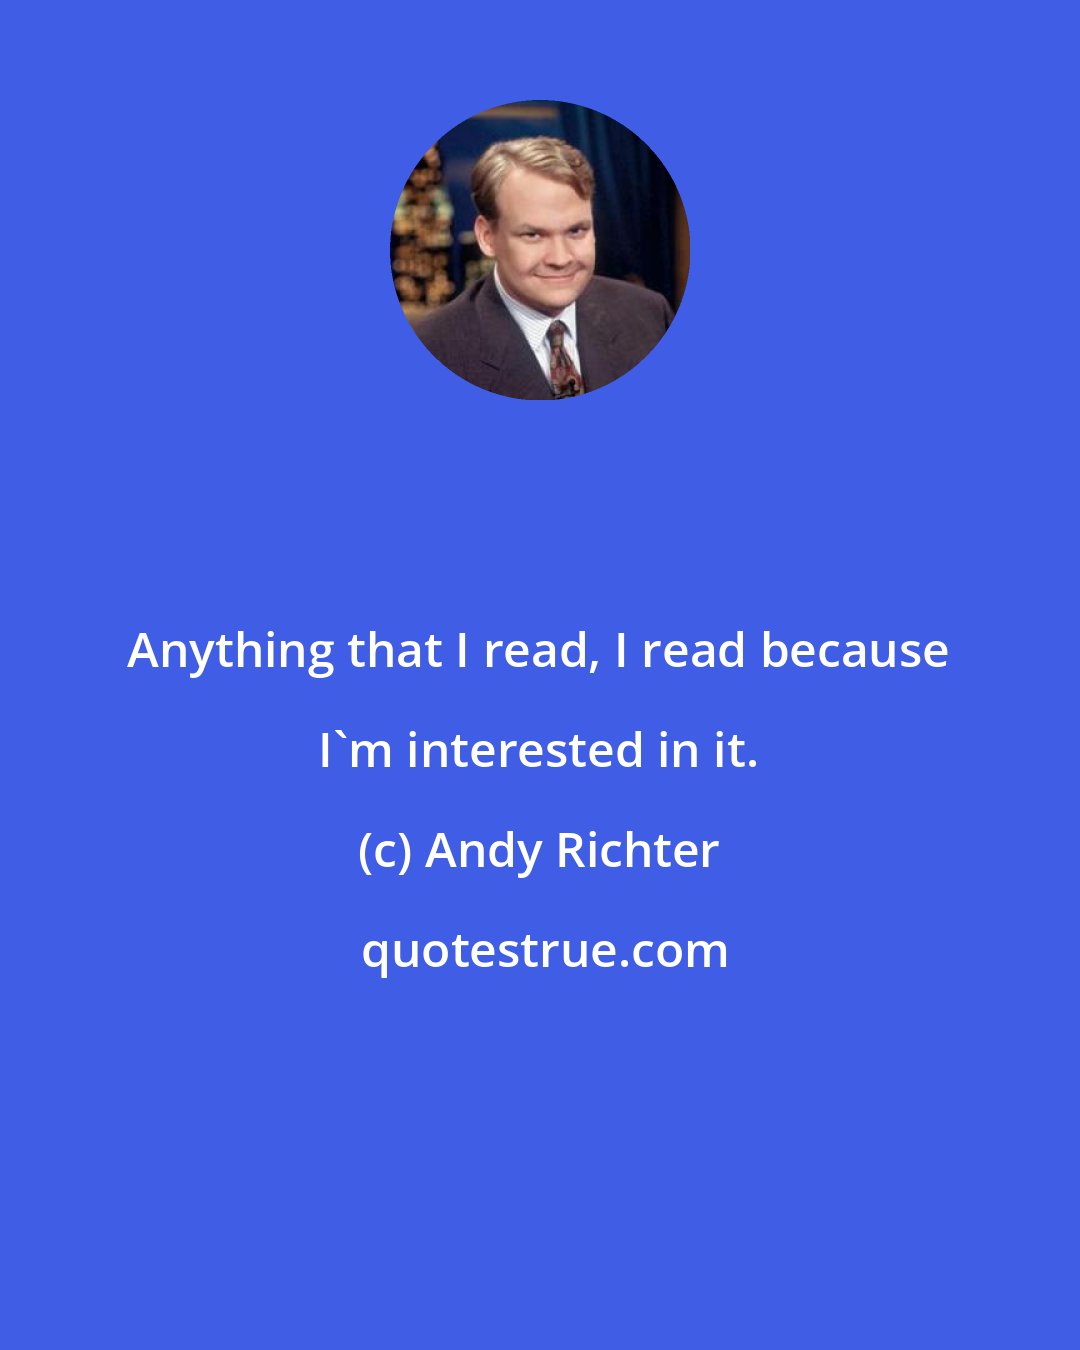 Andy Richter: Anything that I read, I read because I'm interested in it.